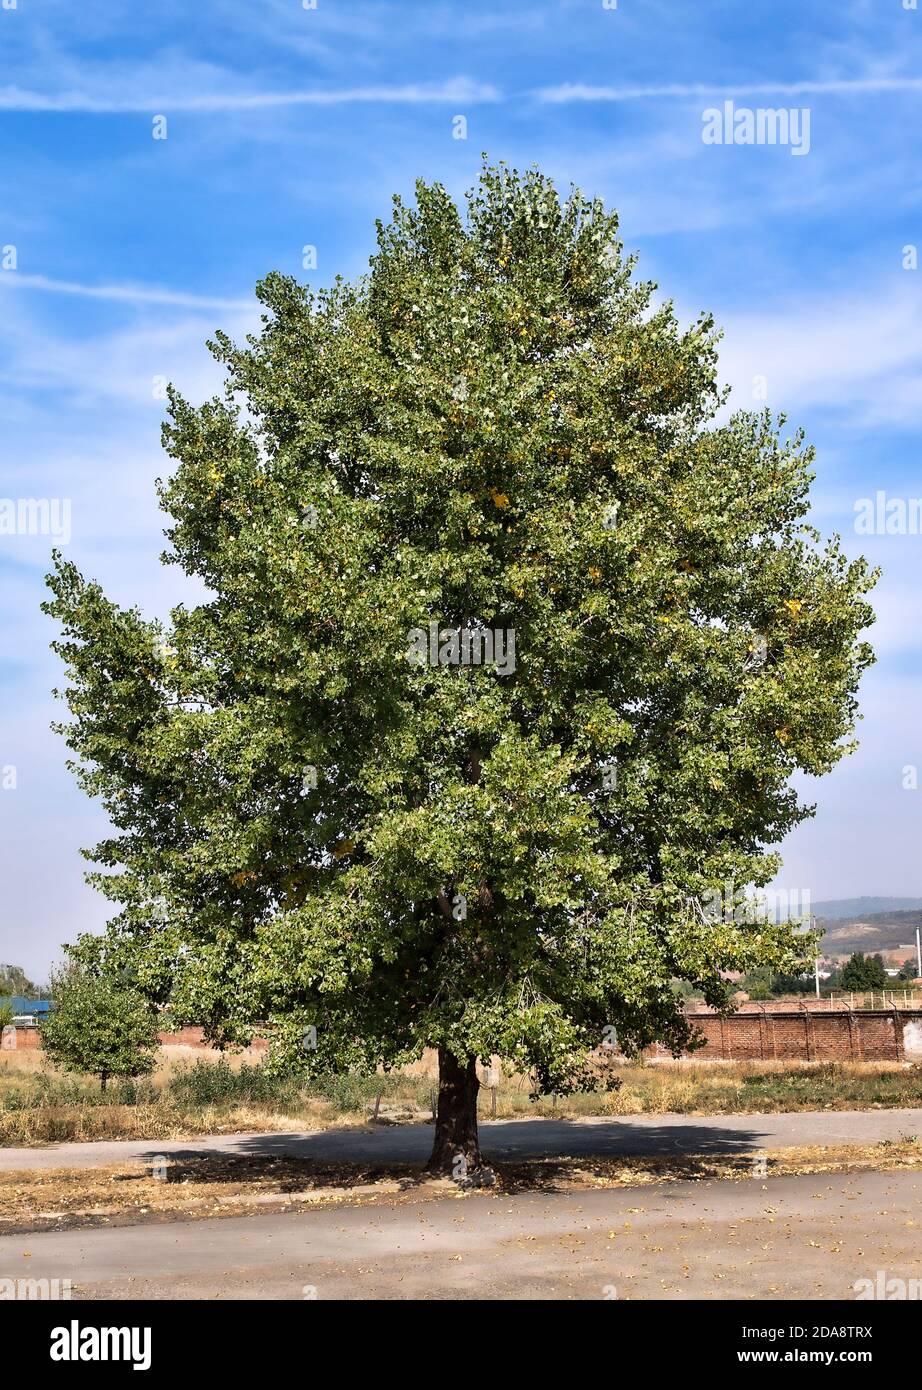 Single basswood (linden) tree during a hot summer day in suburb. HDR photo. Stock Photo